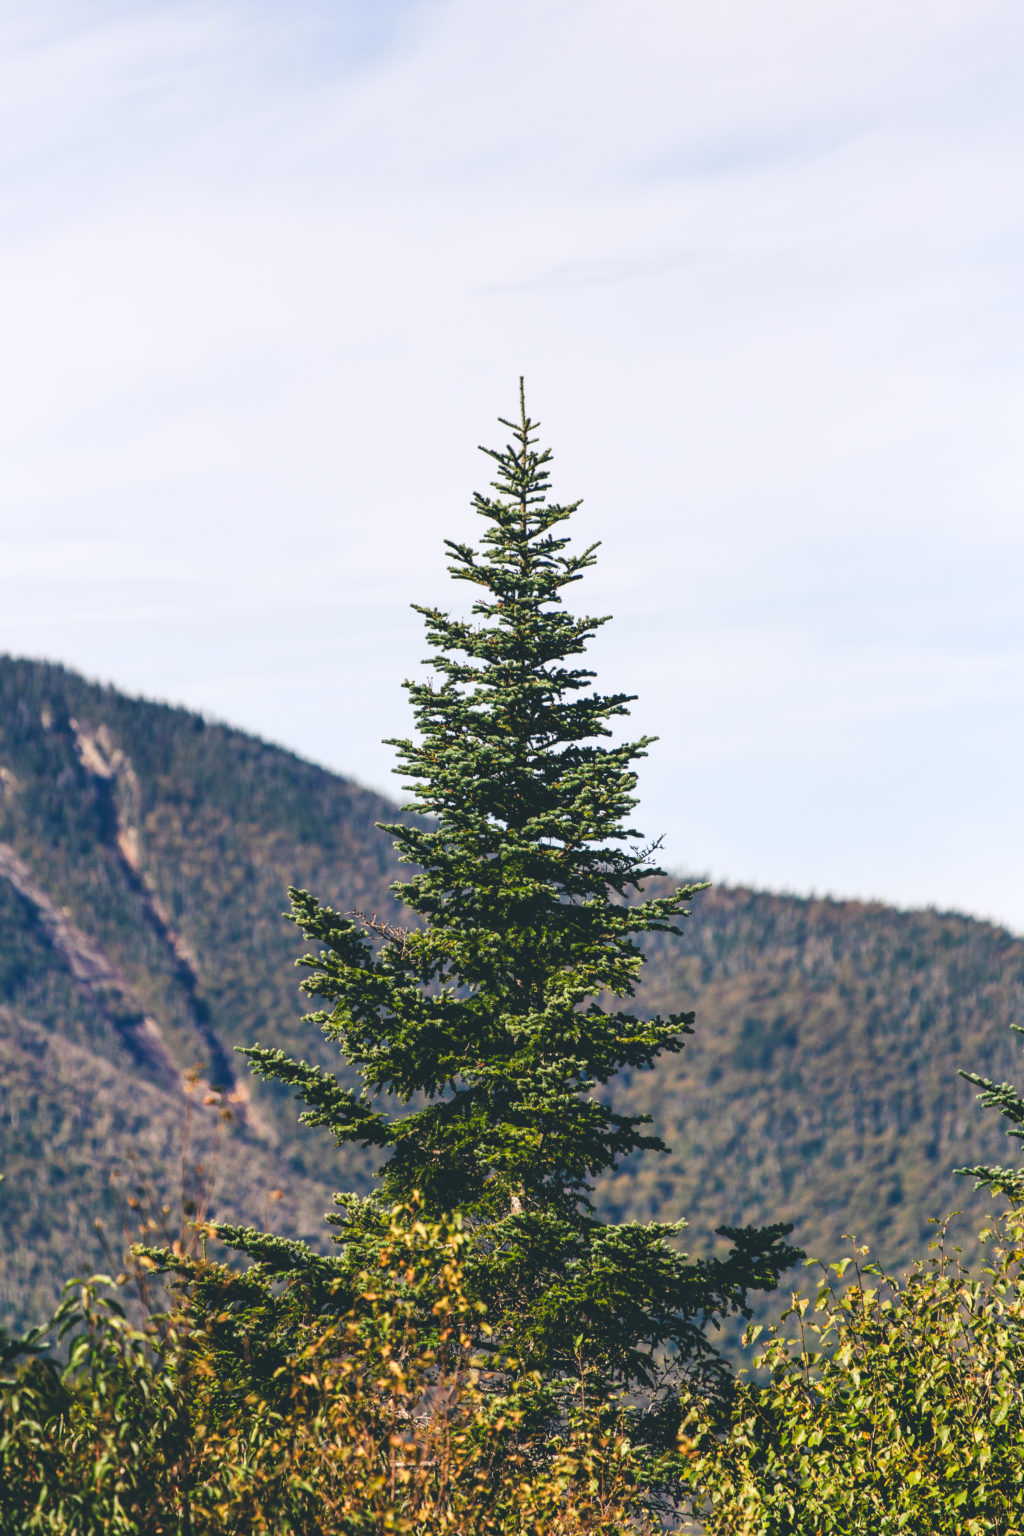 Pointy Evergreen Tree Against a Mountain